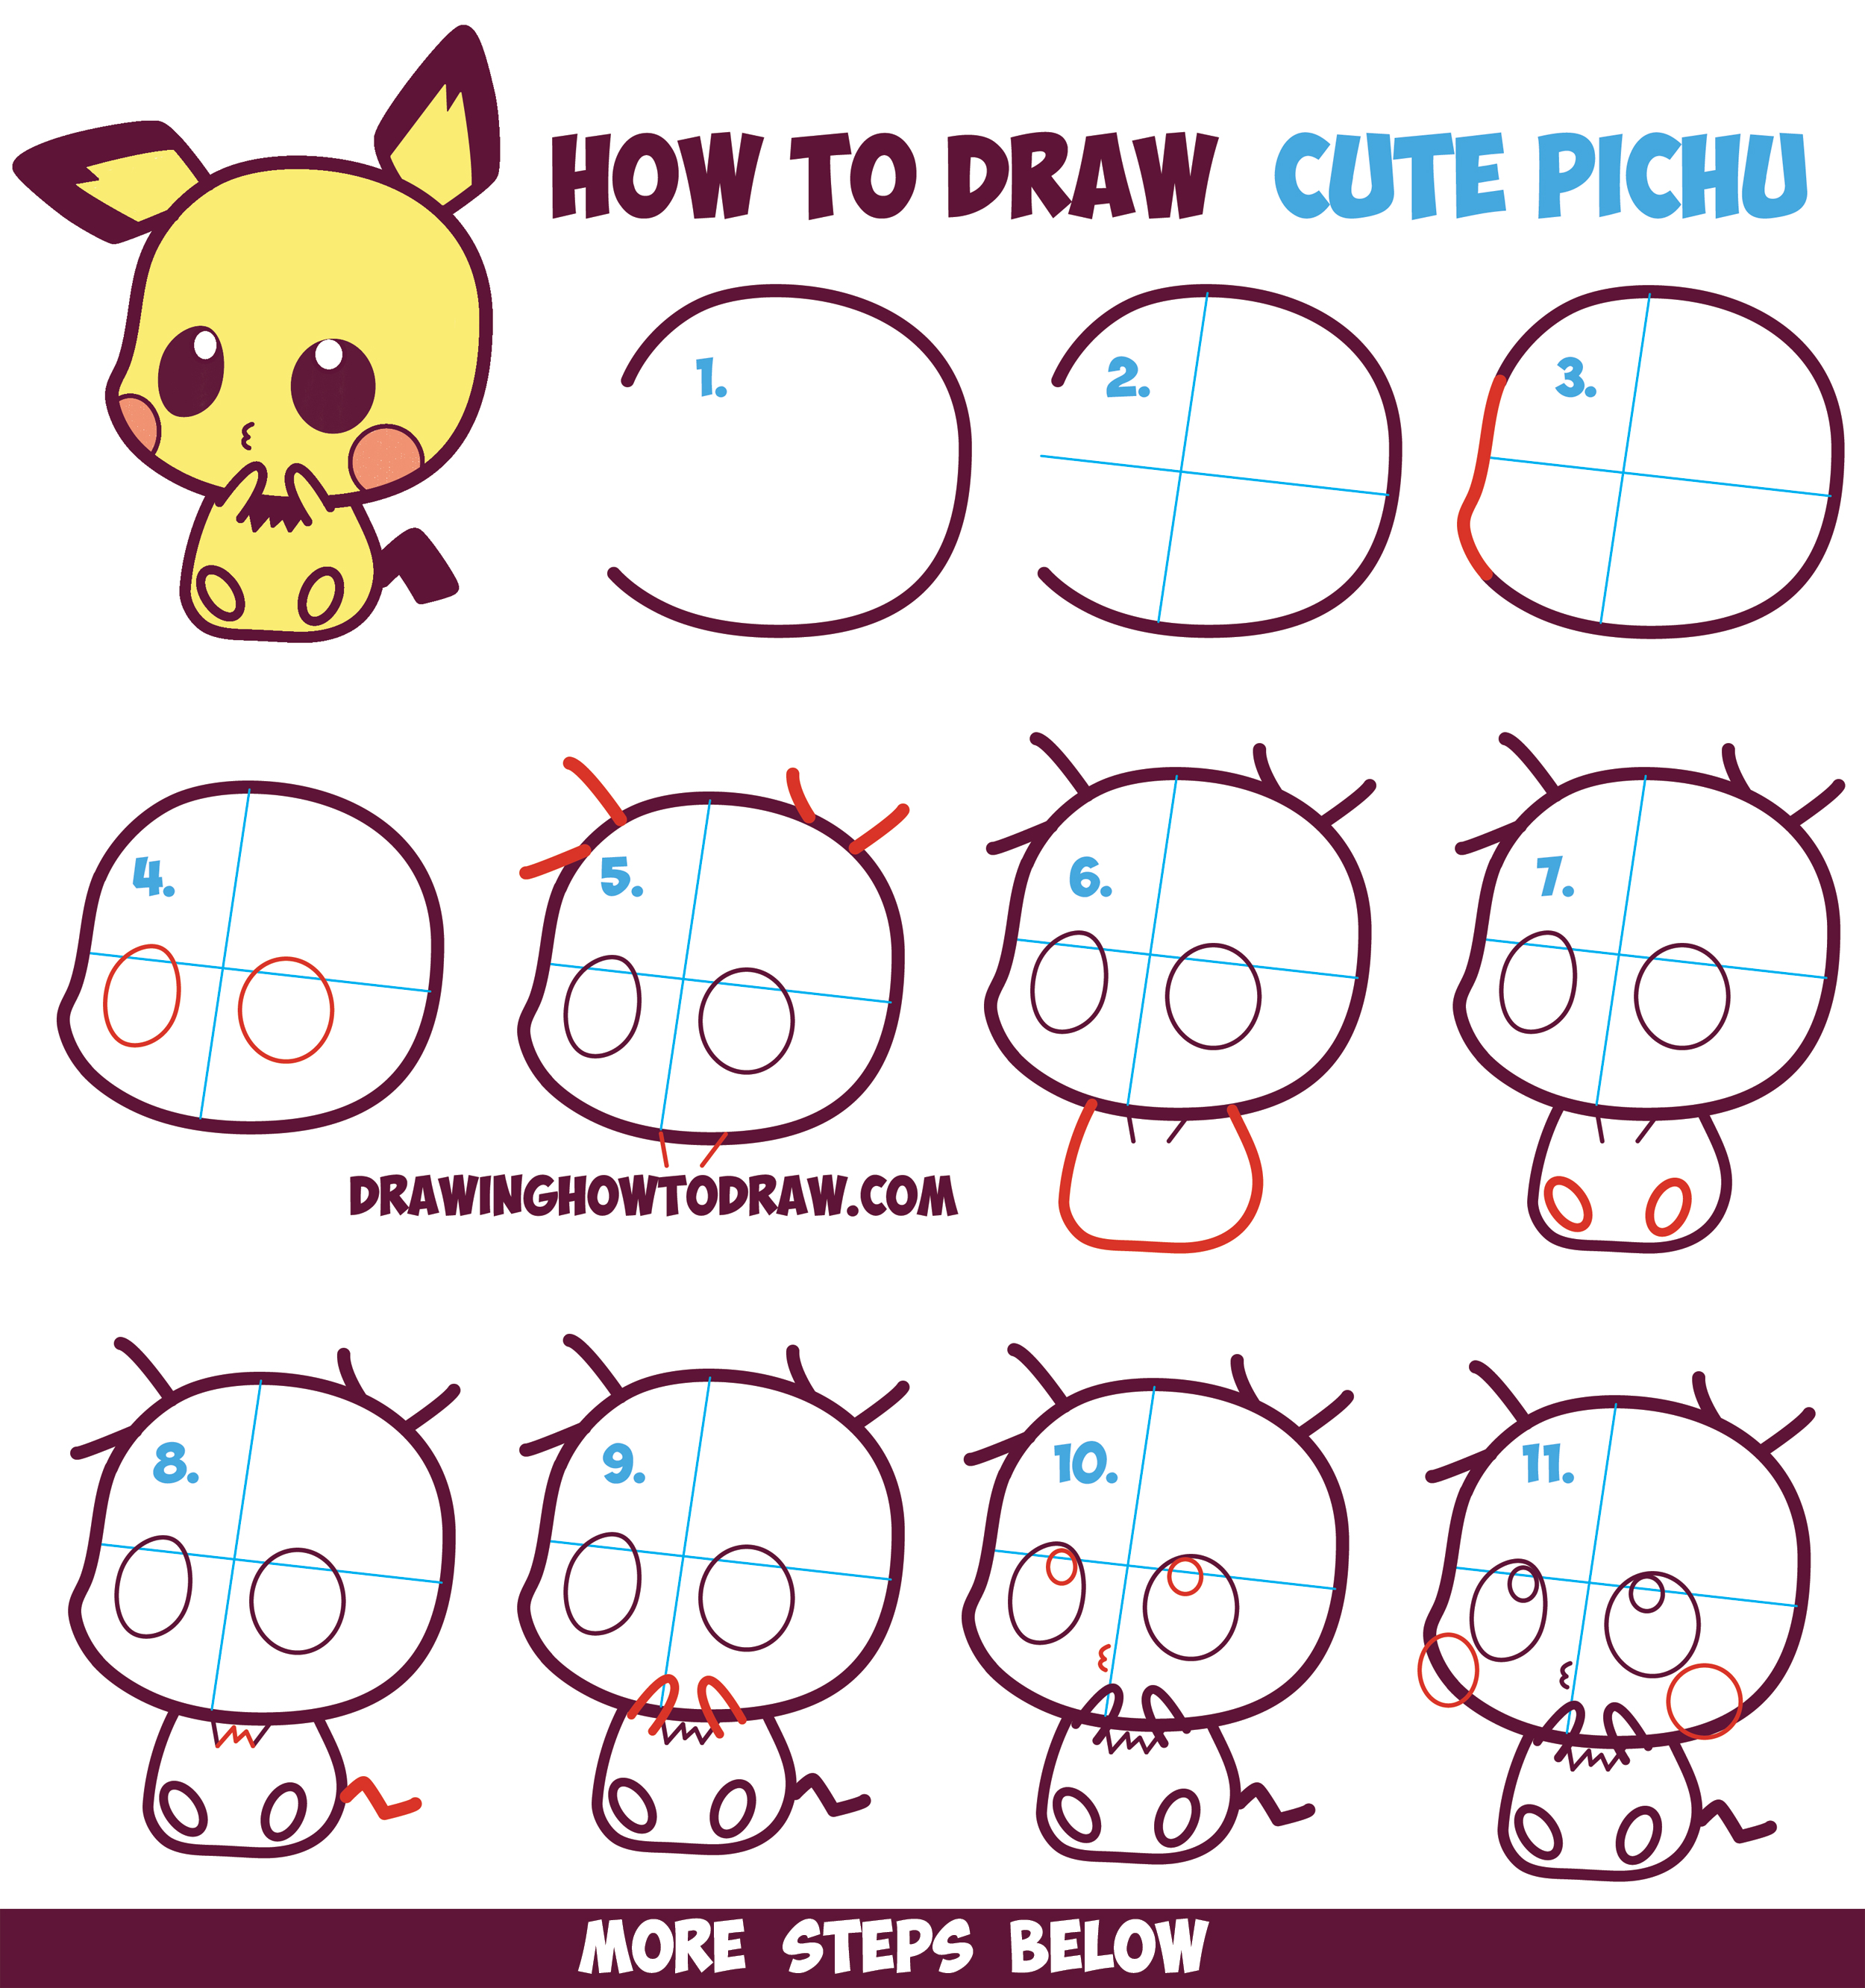 How to Draw Cute / Kawaii / Chibi Pichu from Pokemon in Easy Step by